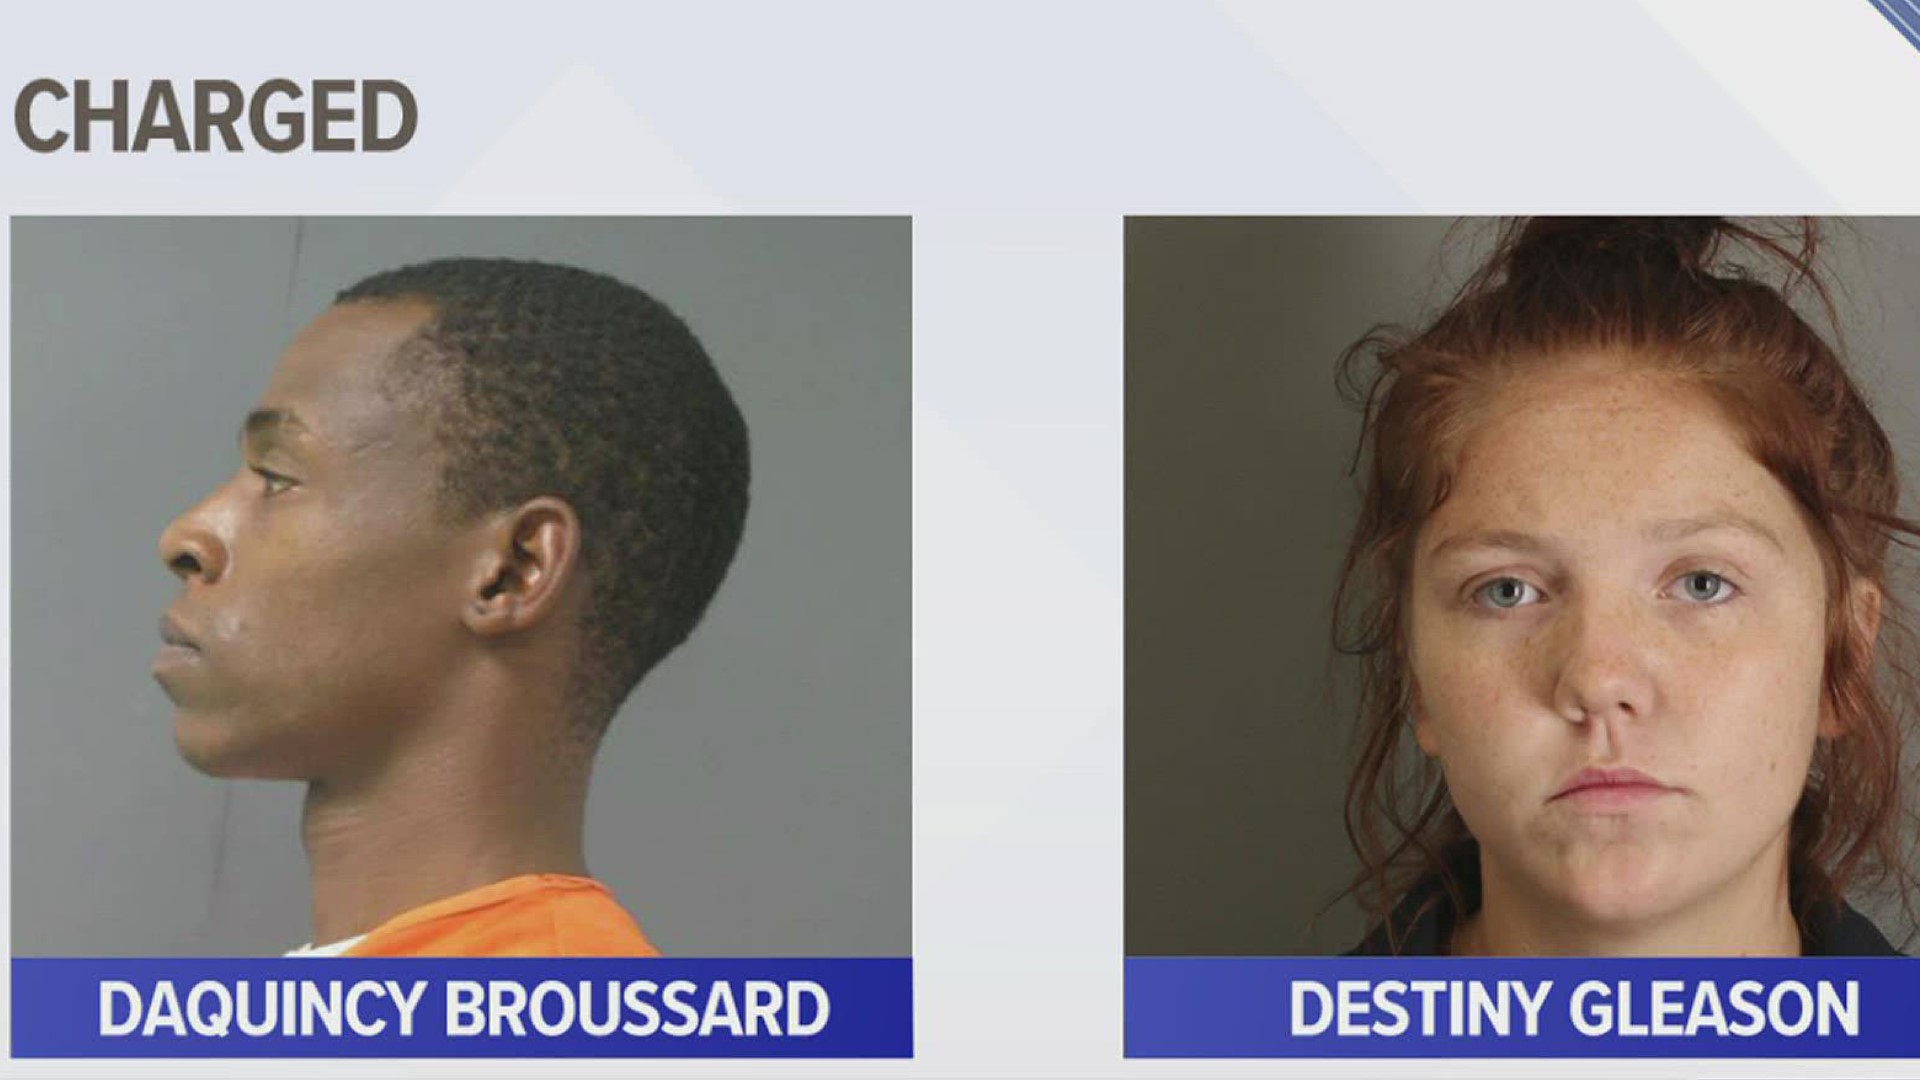 DaQuincy Broussard, 37, has been charged with capital murder. Destiny Gleason, 24, has been charged with tampering with evidence.